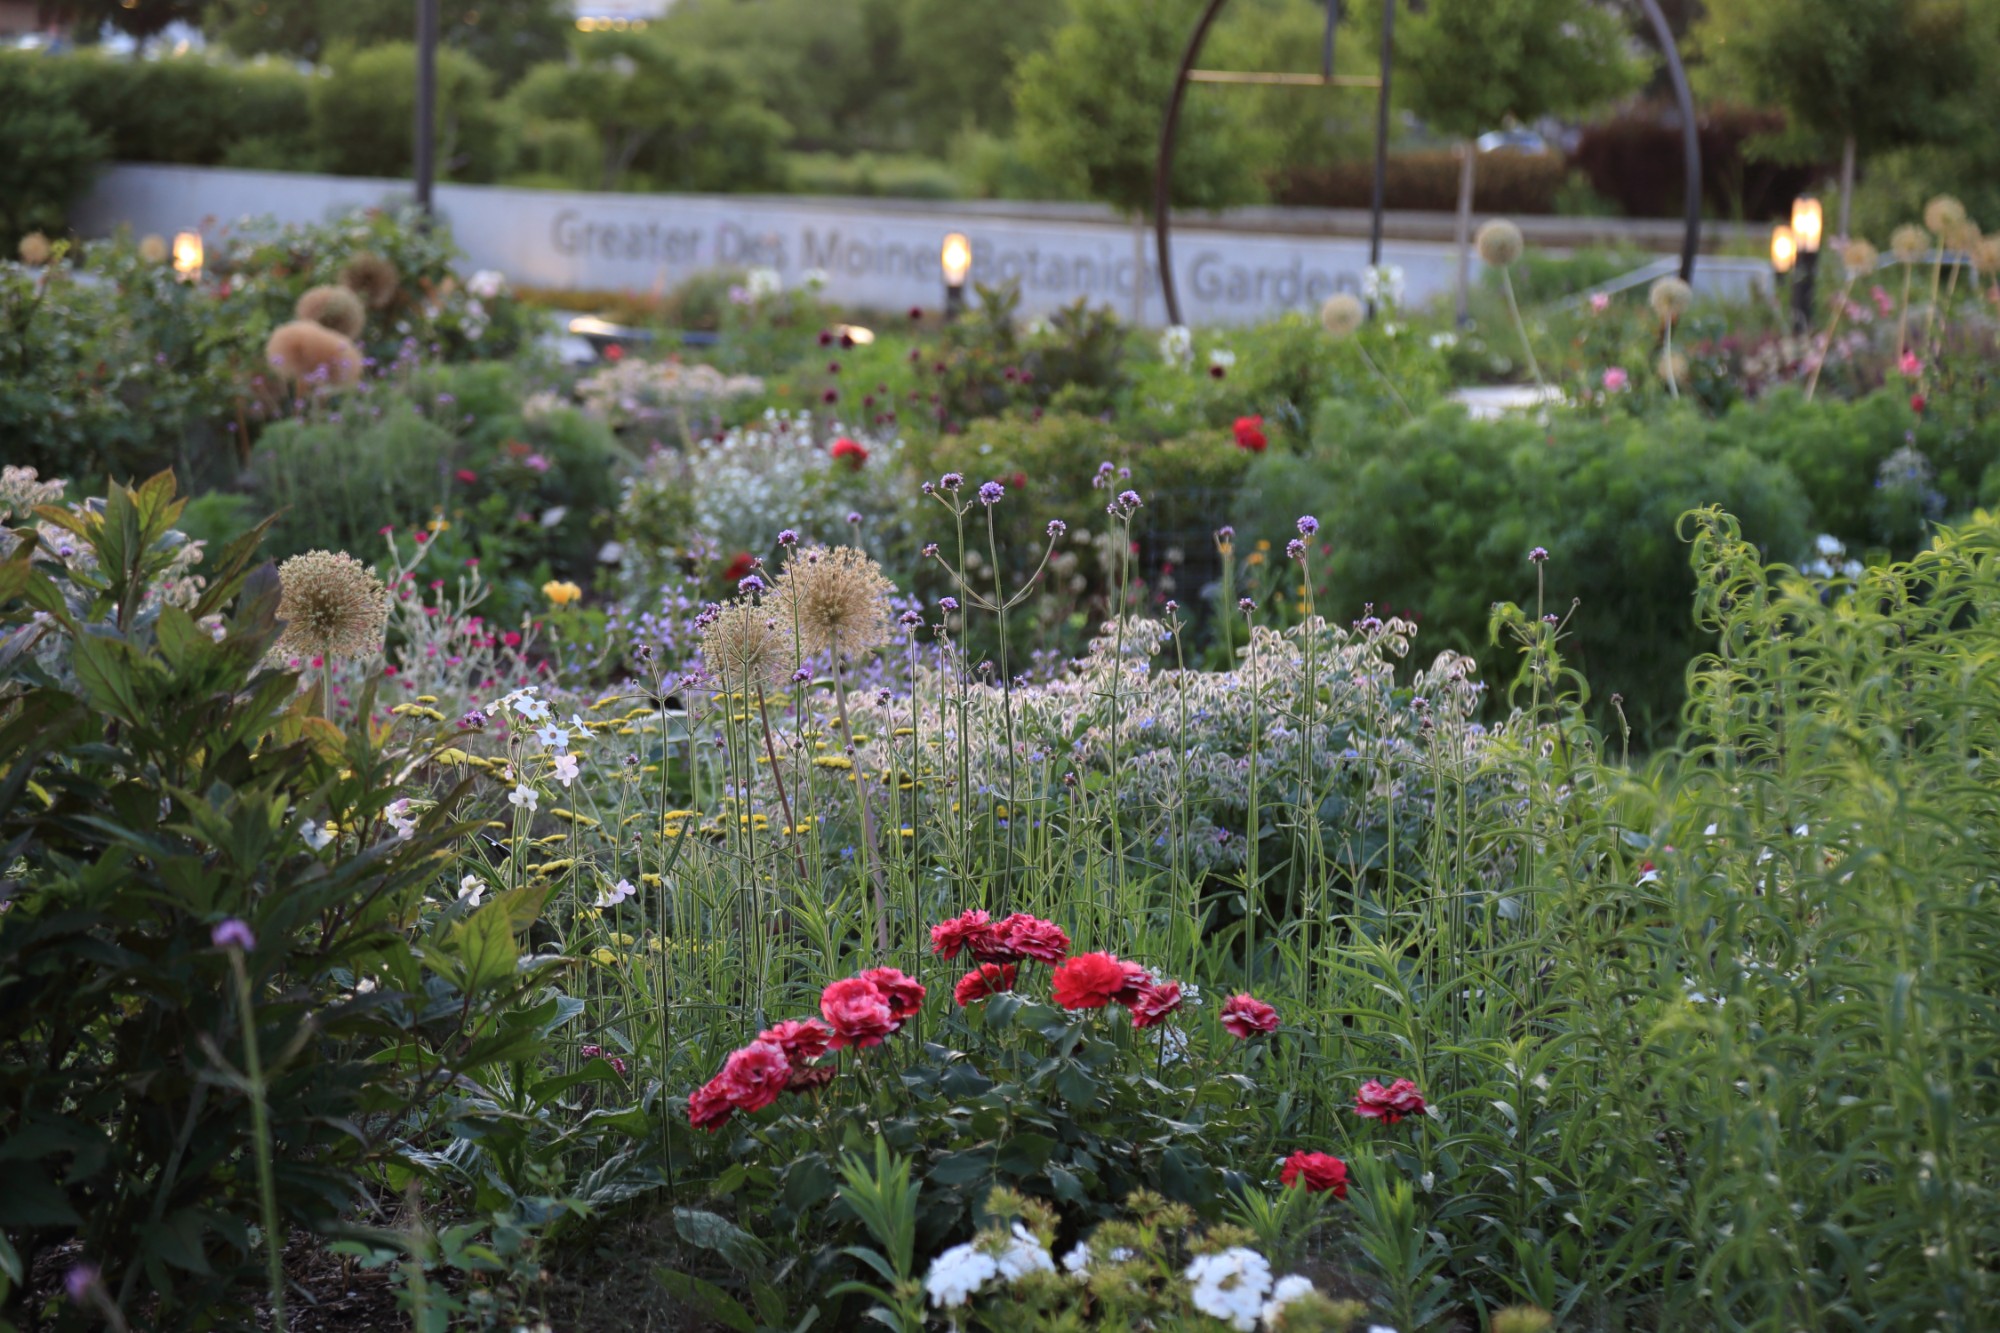 The Wells Fargo Rose Garden glowing in the evening light on June 18. Photo by Kelly Norris.